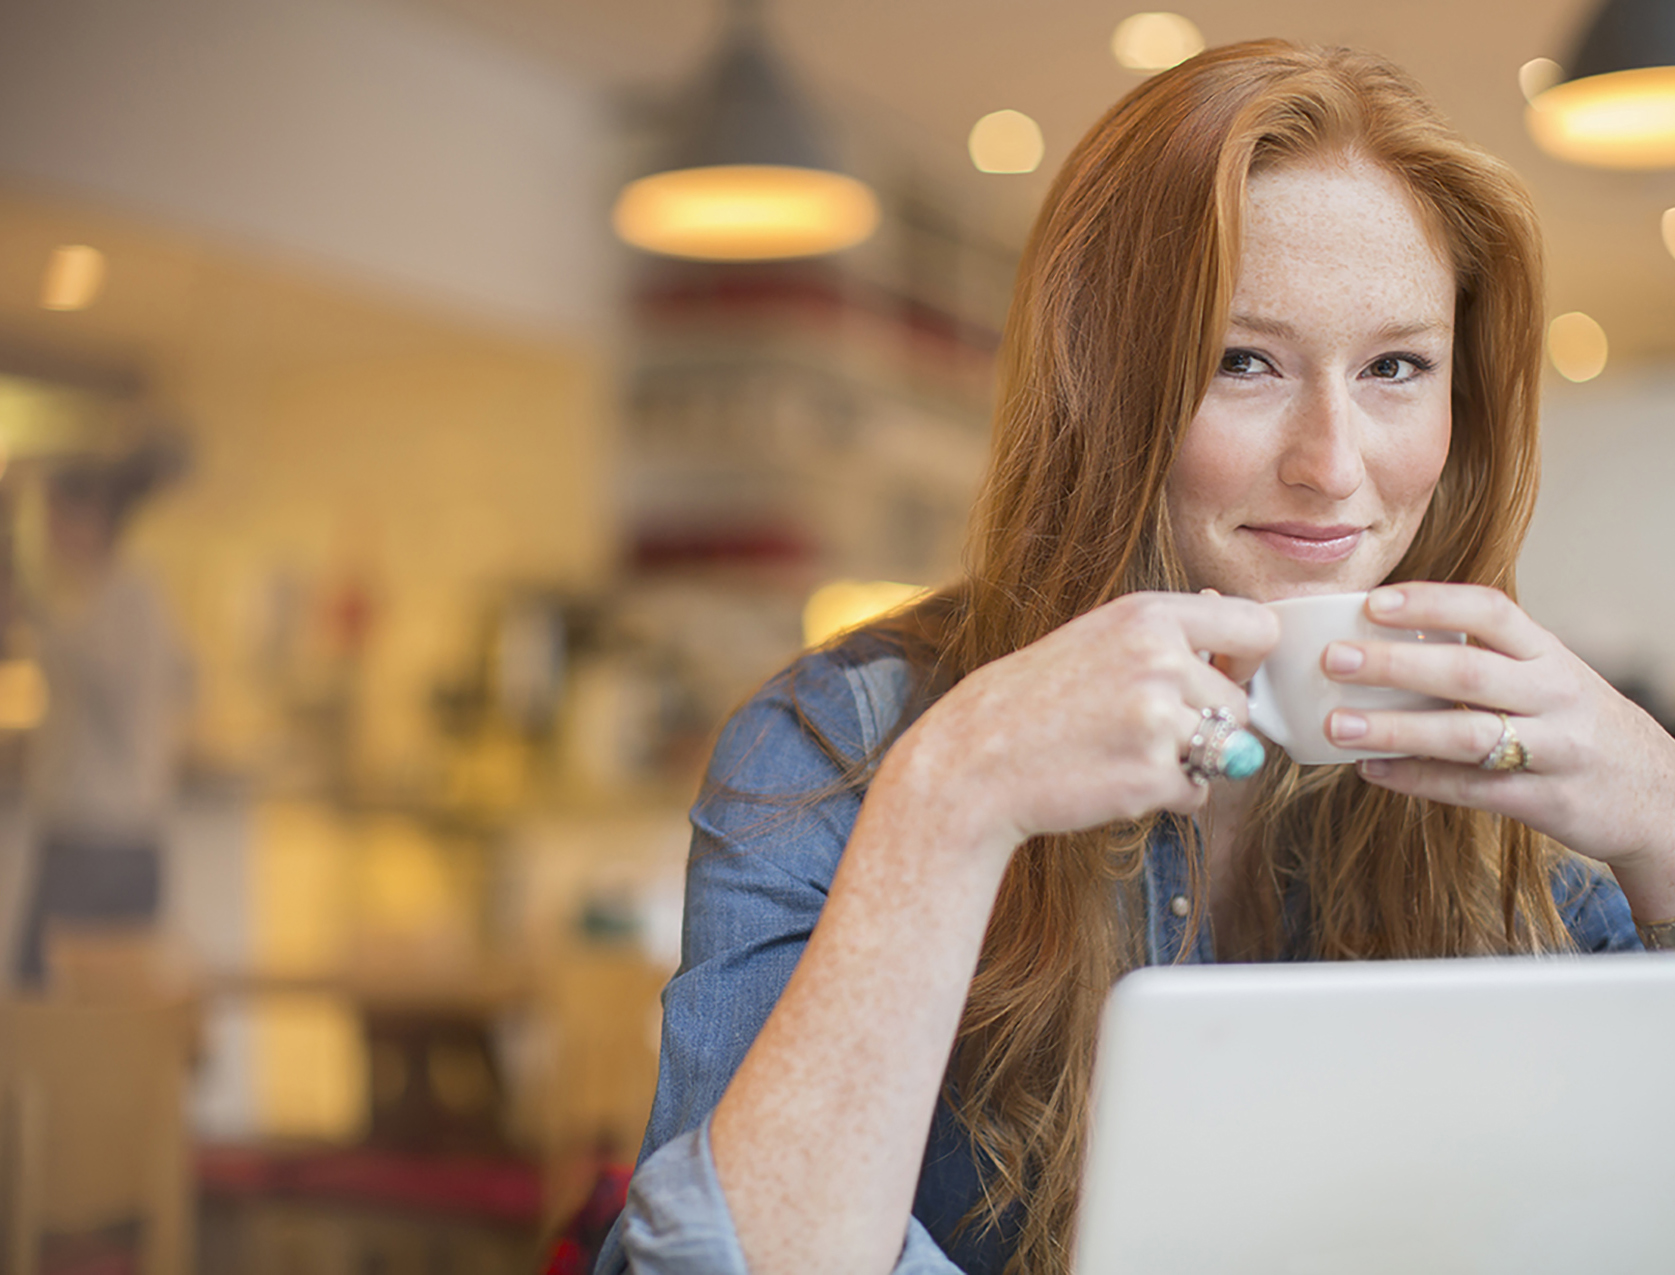 accountant works on laptop drinking coffee